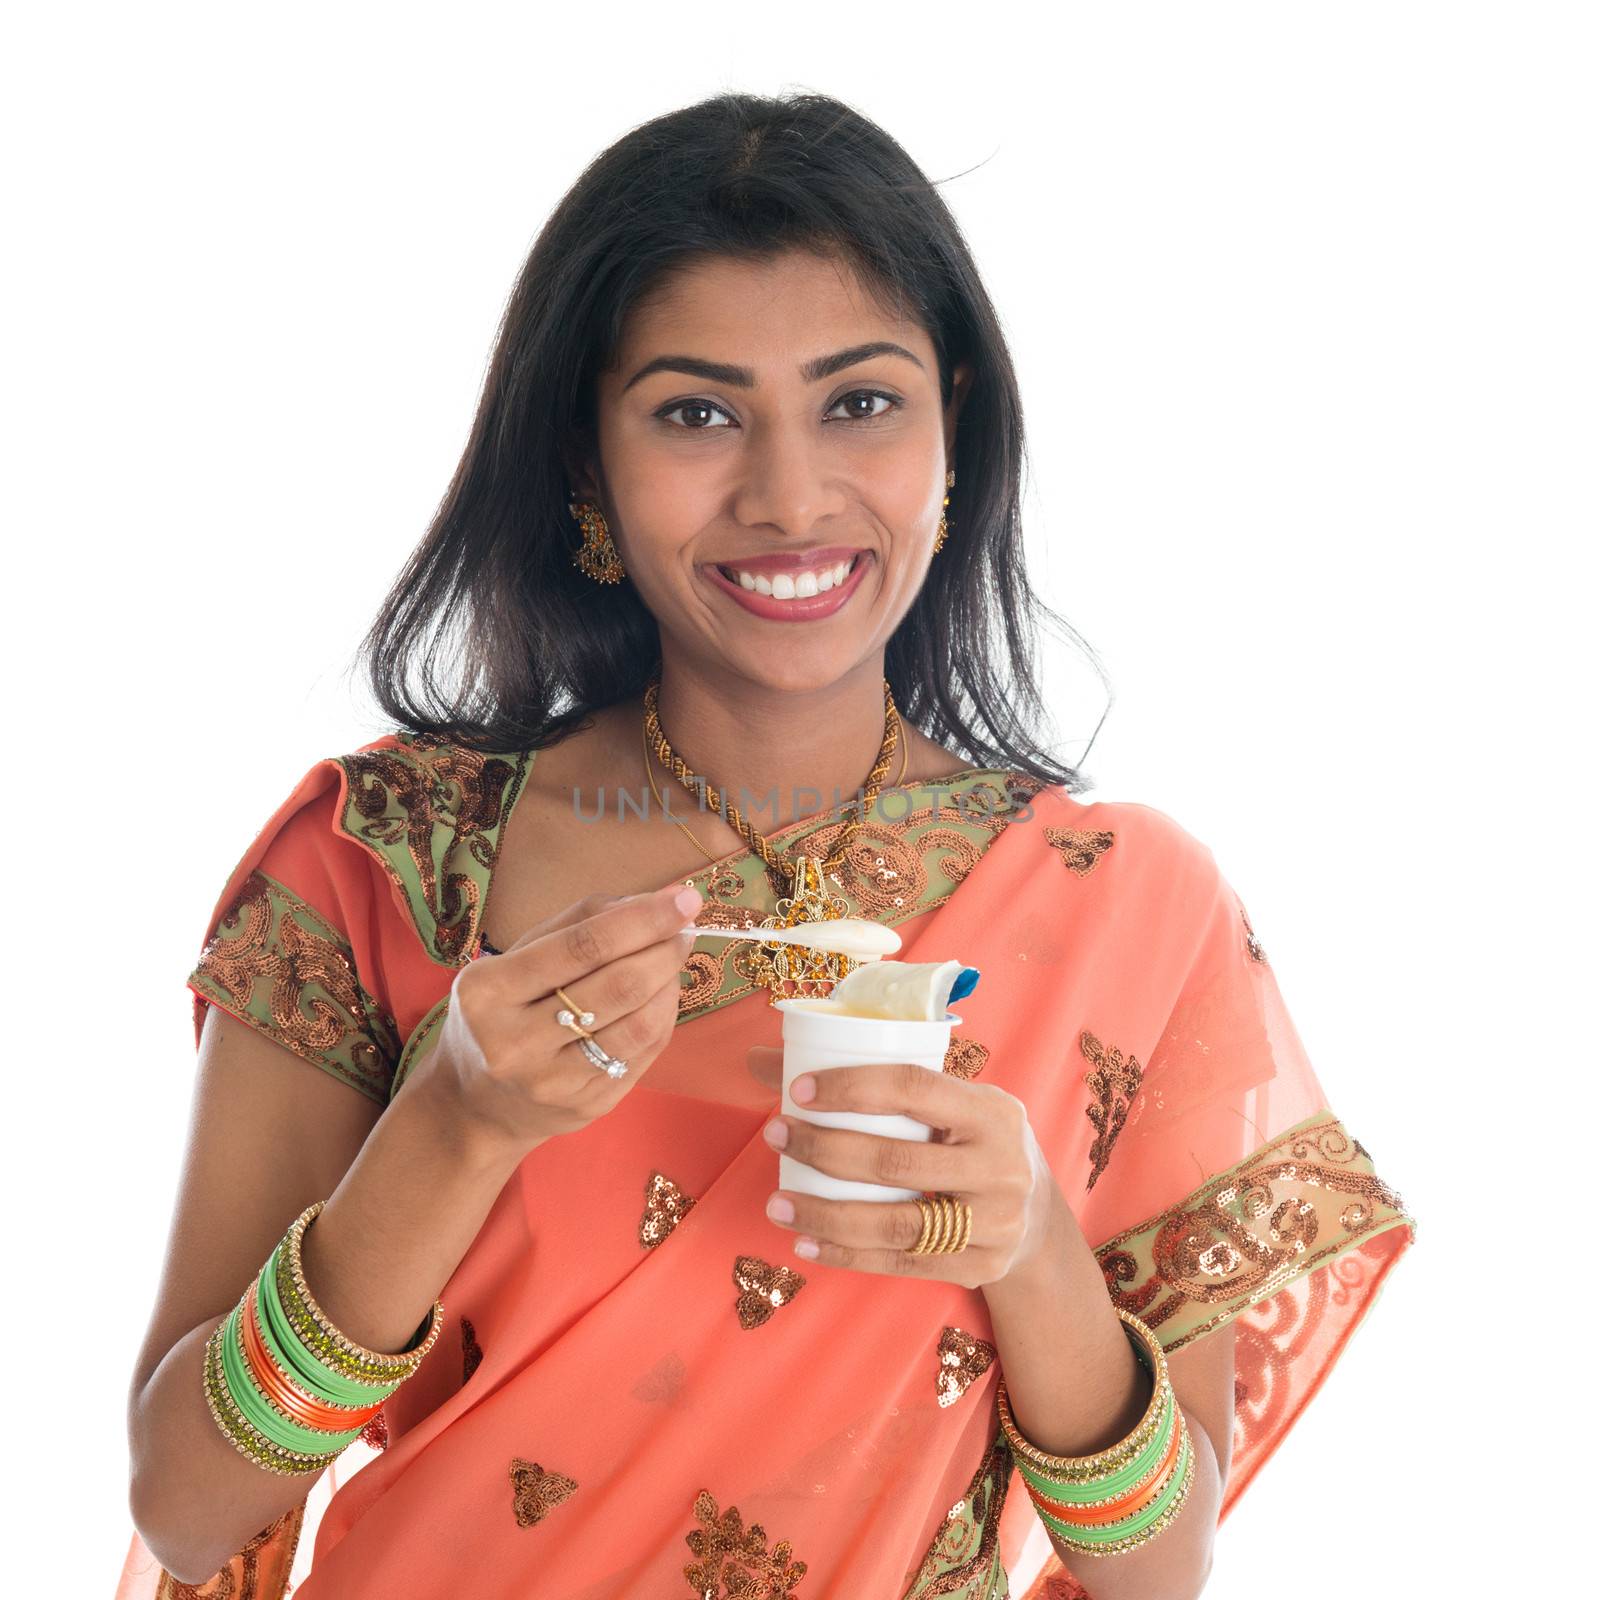 Happy Traditional Indian woman in sari eating yogurt, isolated on white background.